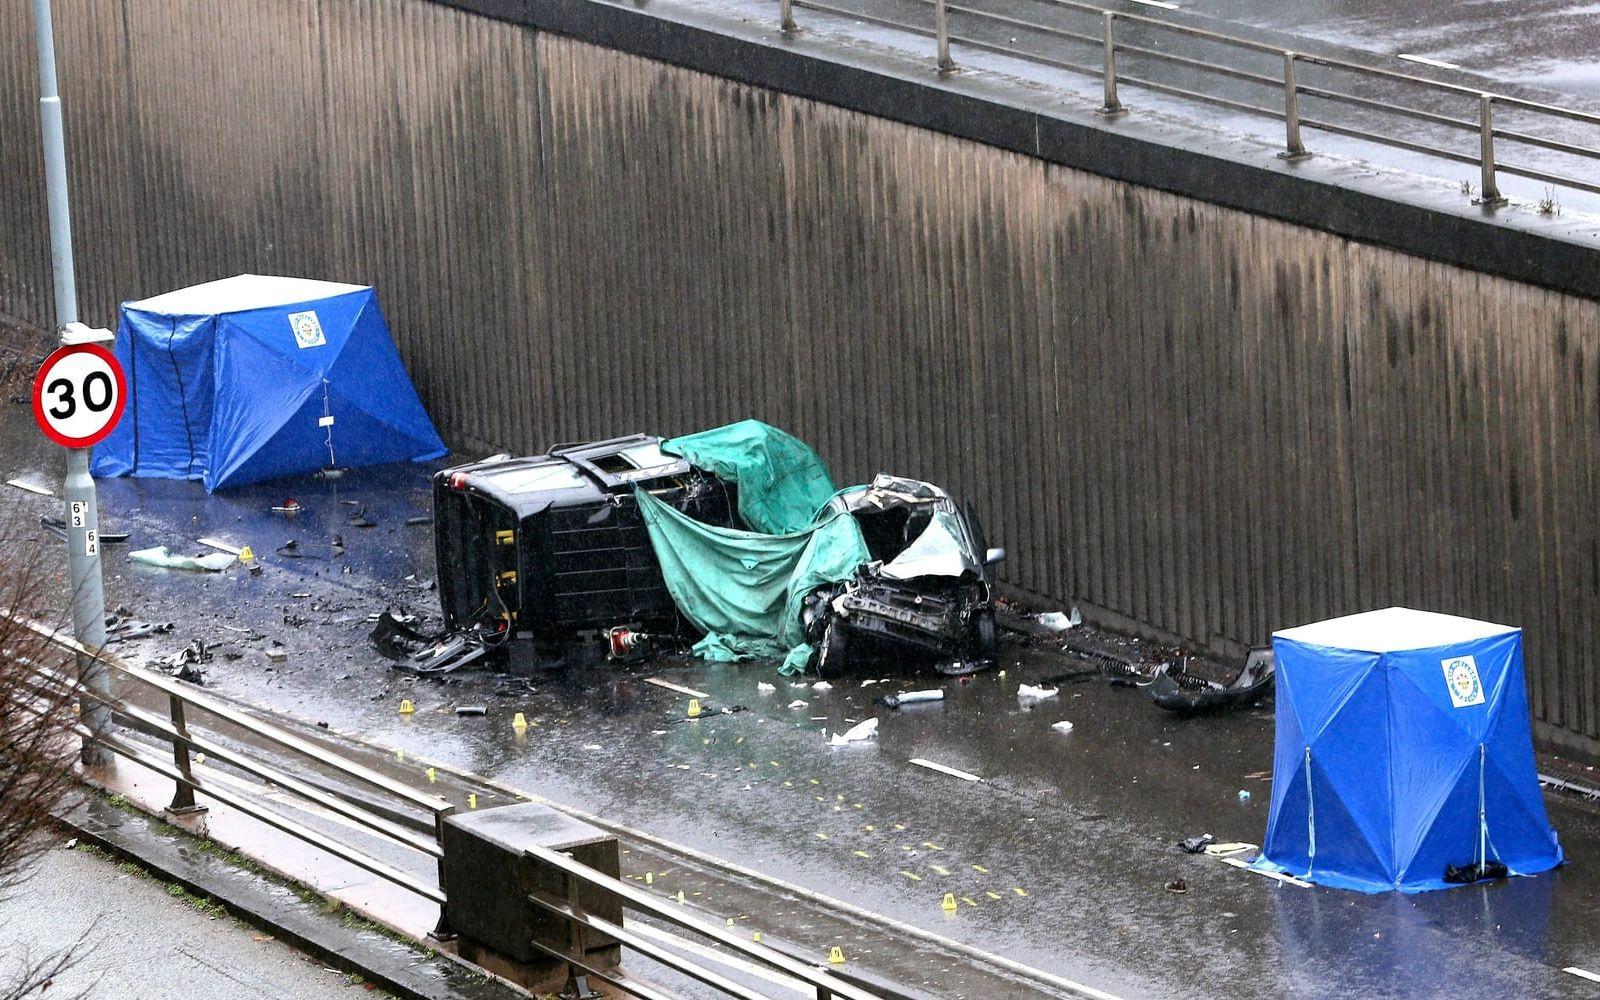 The scene of a multi vehicle crash at the entrance of an underpass near Edgbaston, in Birmingham, England, Sunday Dec. 17, 2017, which left six people dead and a seventh critically injured. (Aaron Chown/PA via AP)